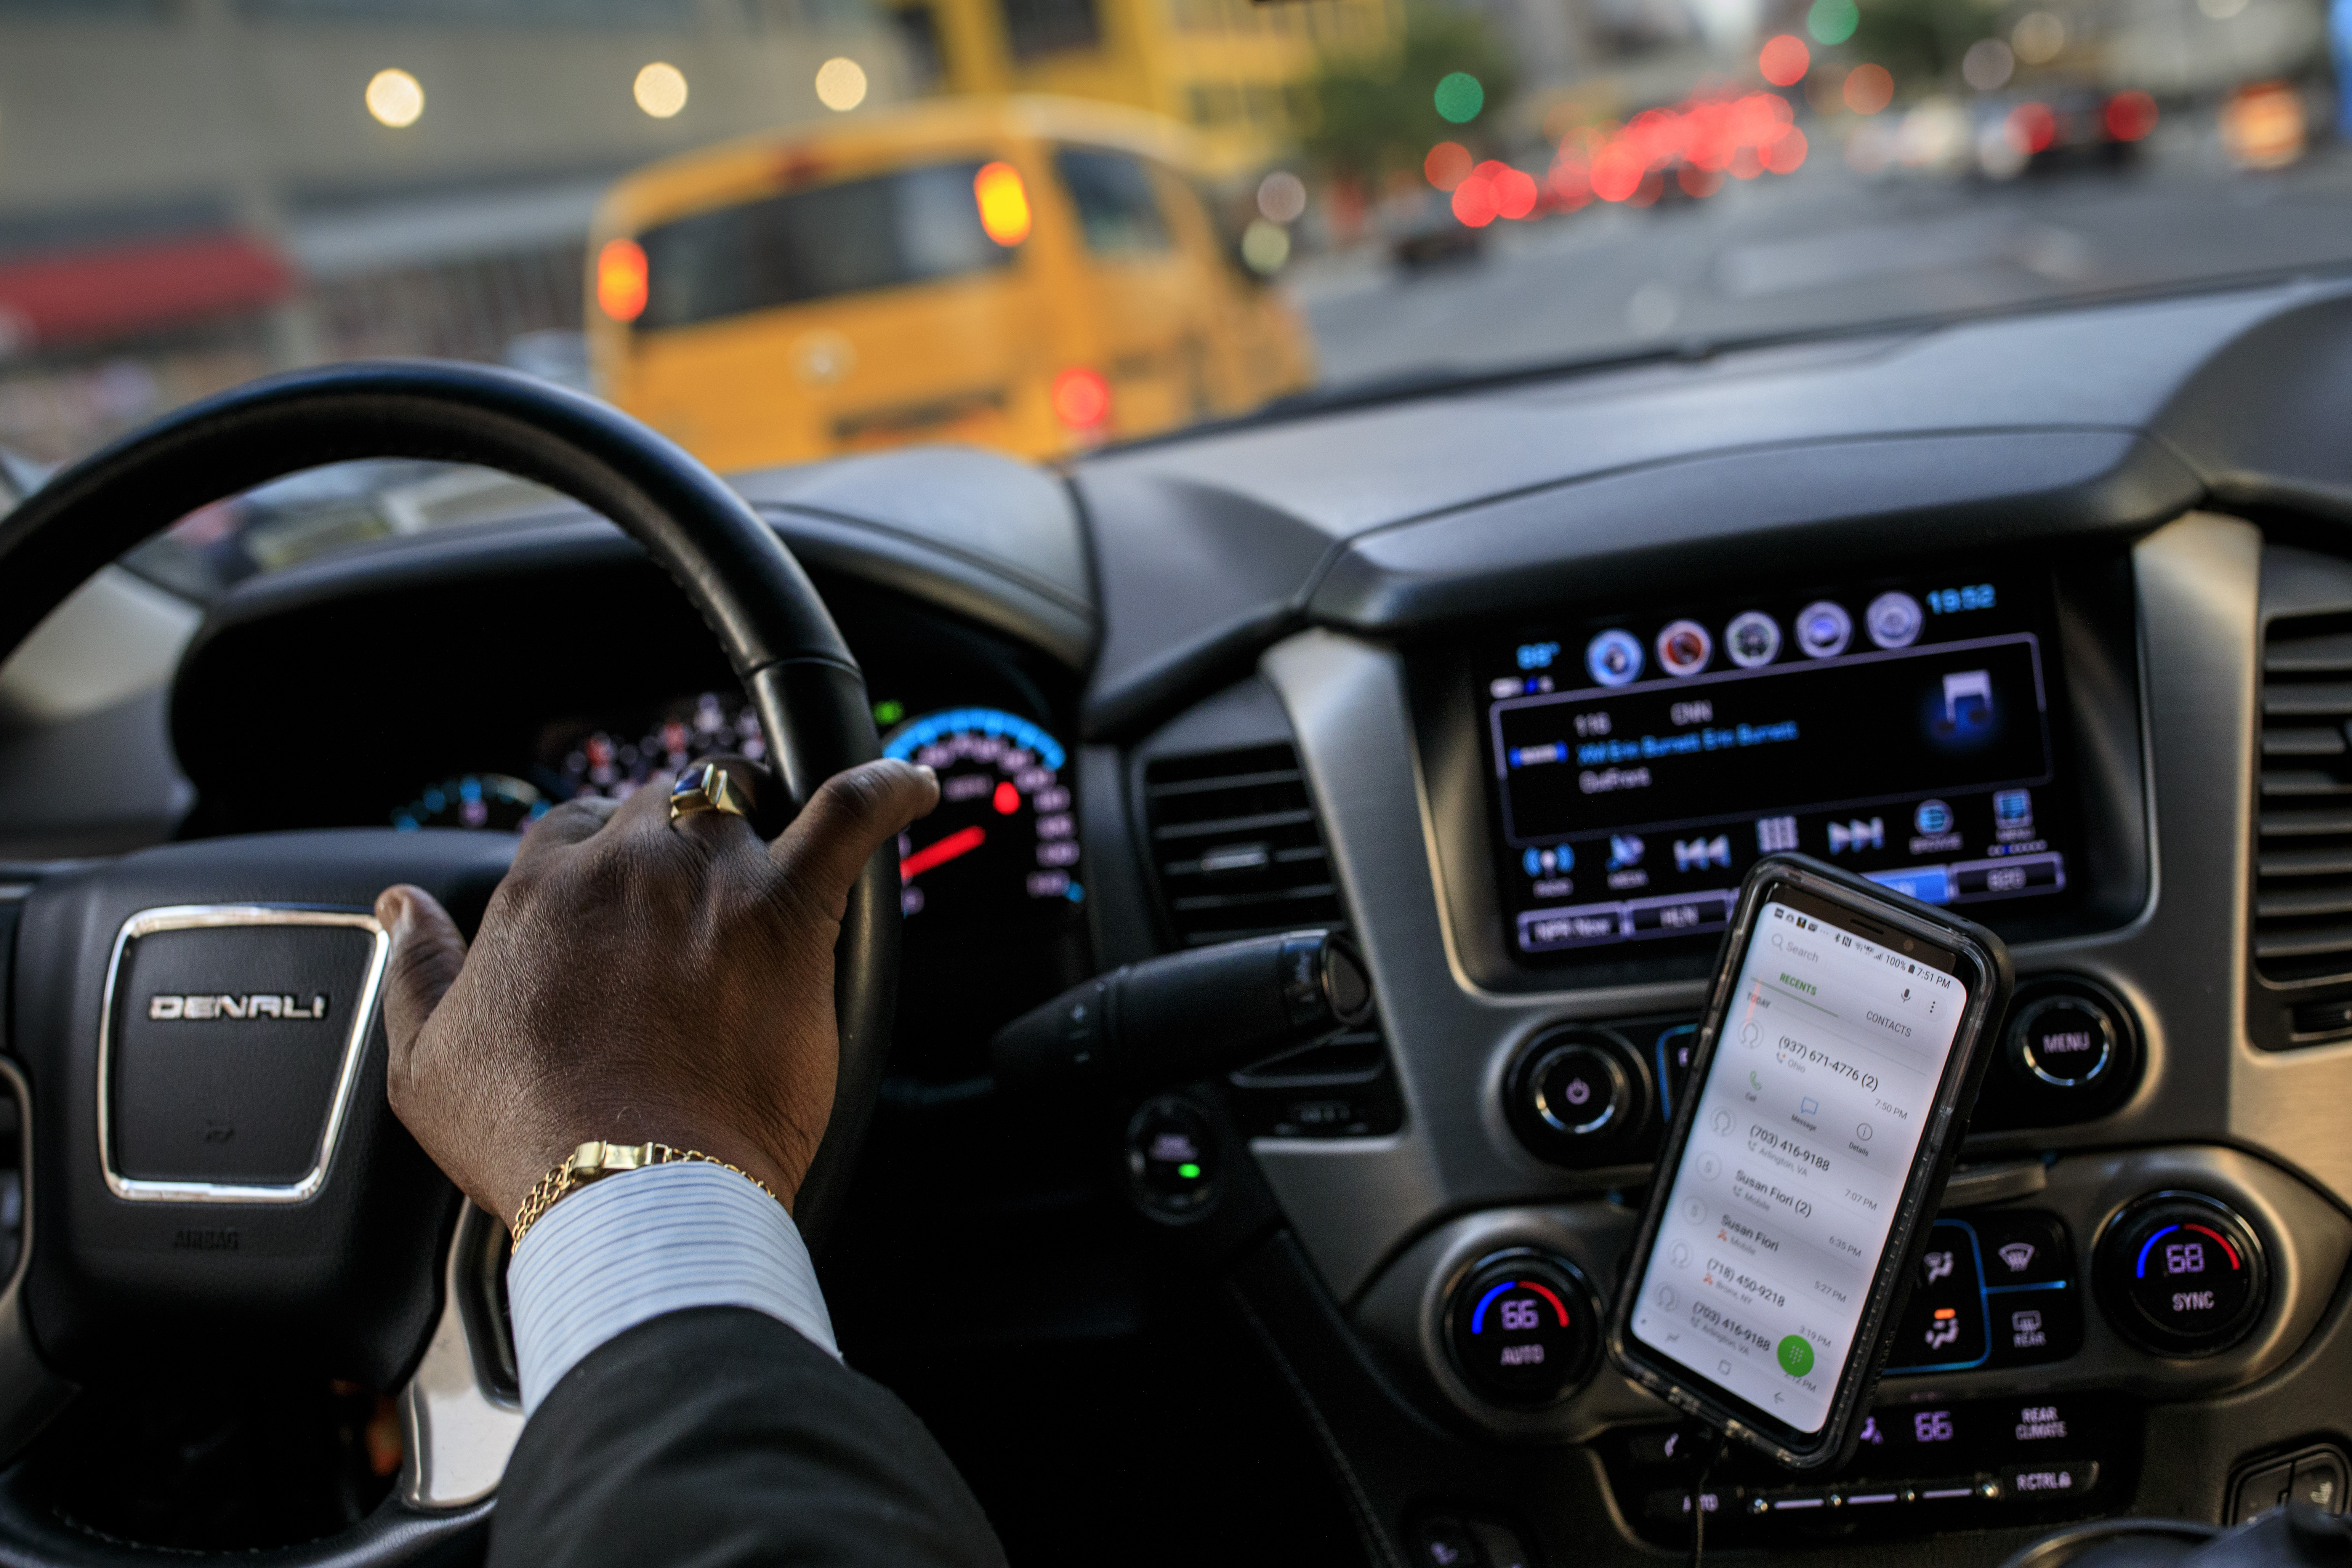 After dropping off passengers at a Broadway play, Johan Nijman, a for-hire driver who runs his own service and also drives for Uber on the side, drives through the West Side of Manhattan on Wednesday evening, August 8, 2018 in New York City. (Photo by Drew Angerer/Getty Images)